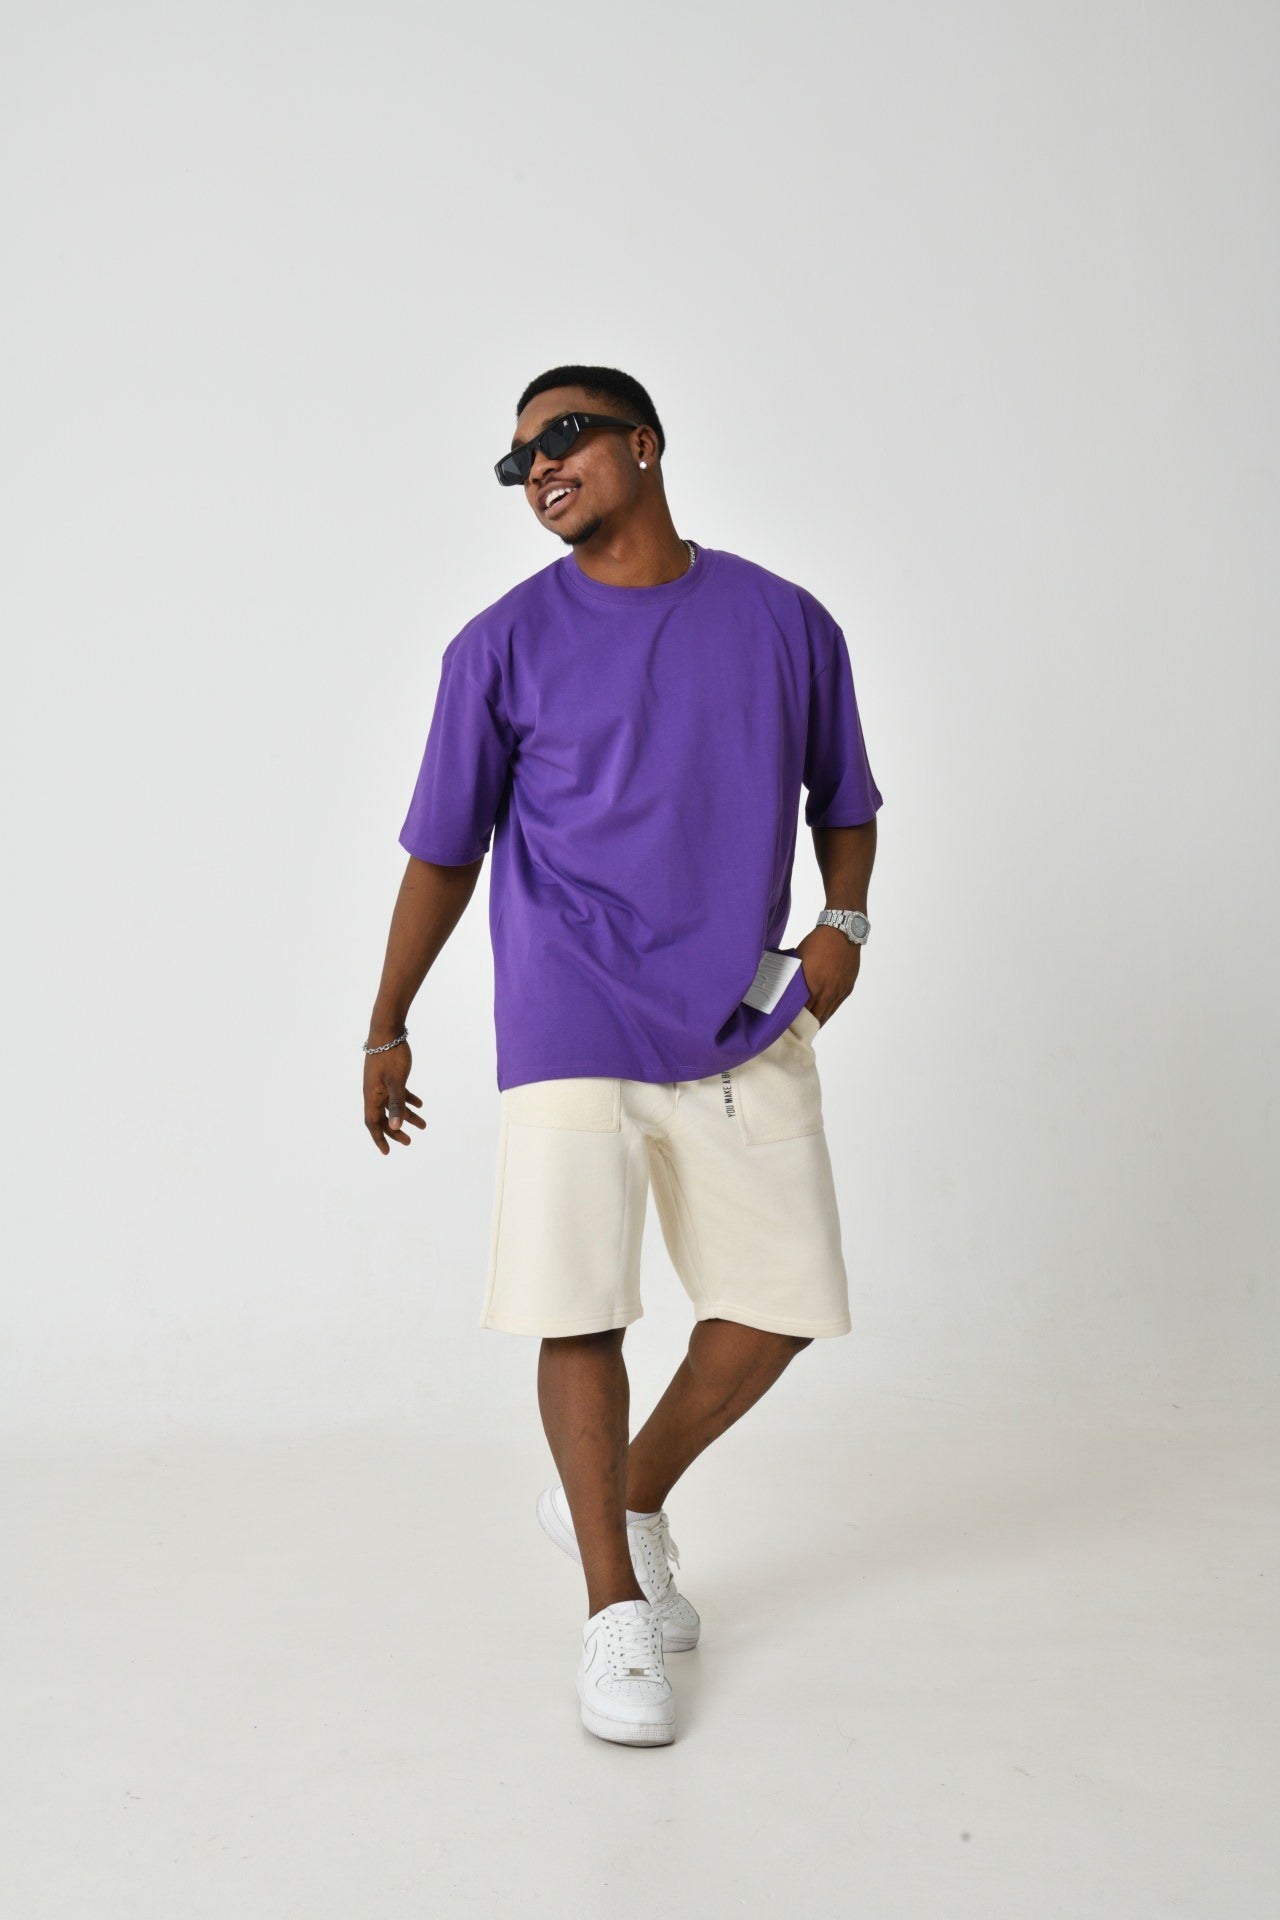 Purple T-Shirt With A Print On The Back From DFRNT